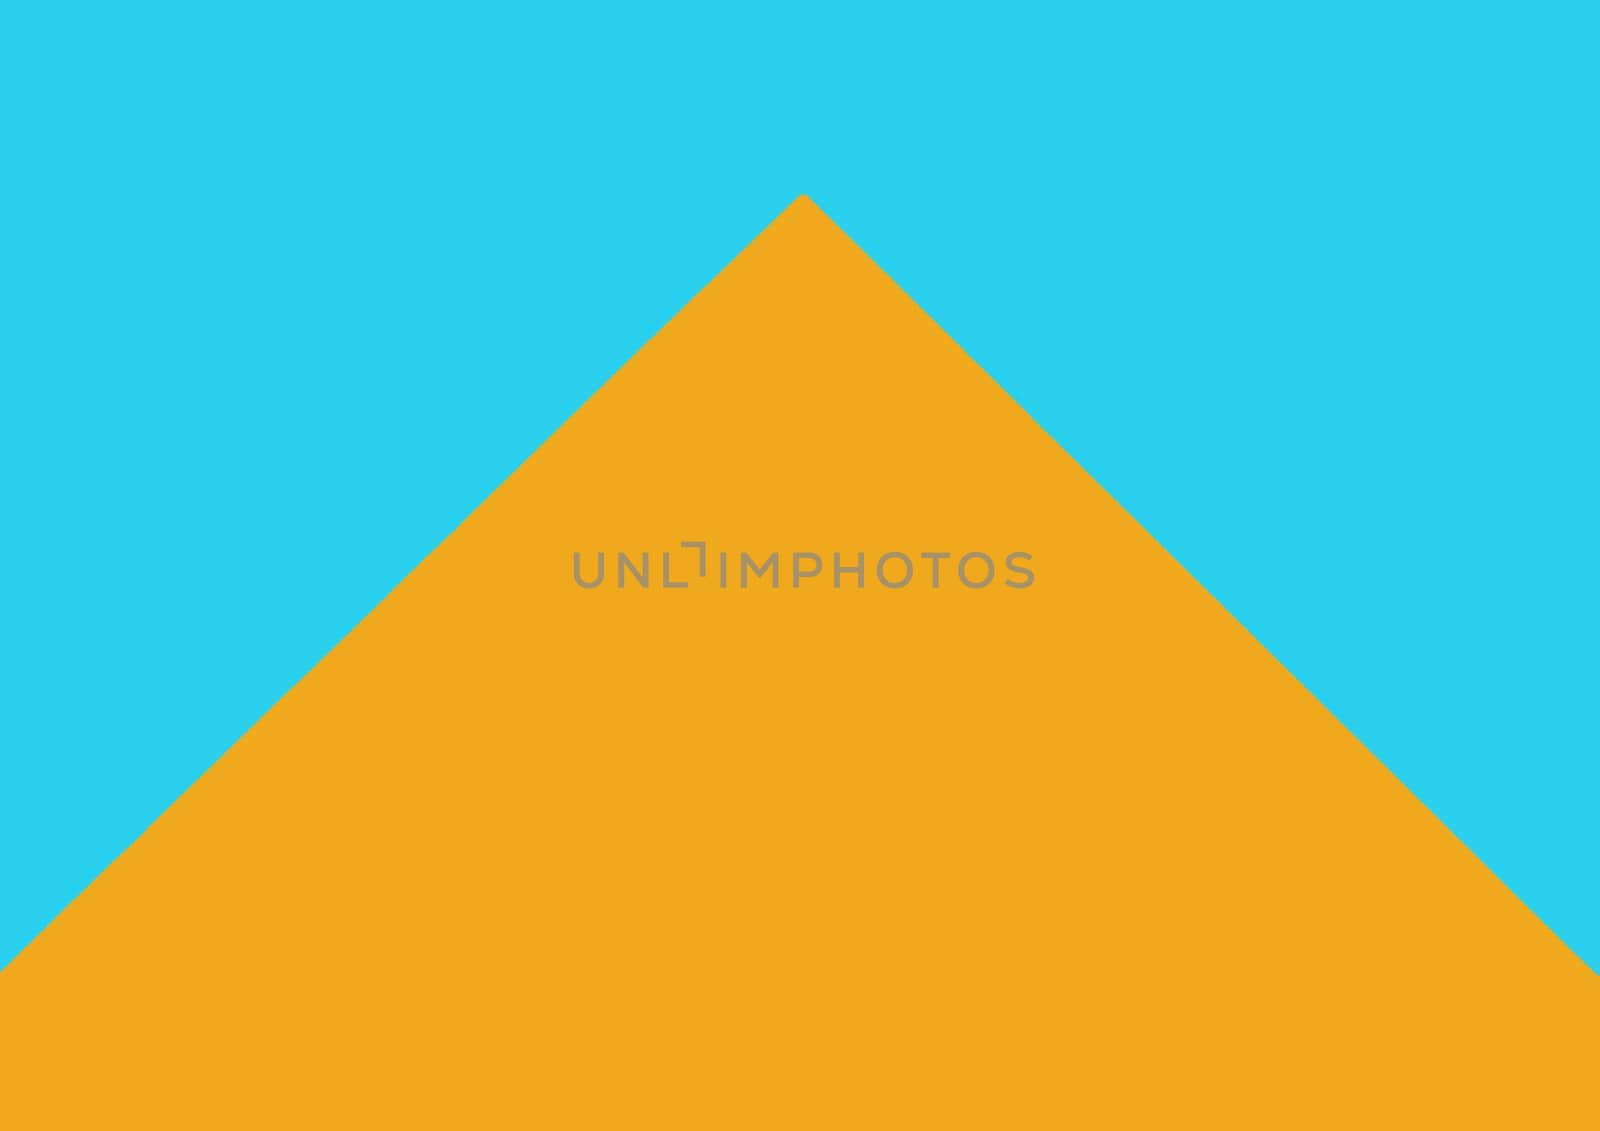 Abstract design orange pyramid pattern on a background of blue sky.